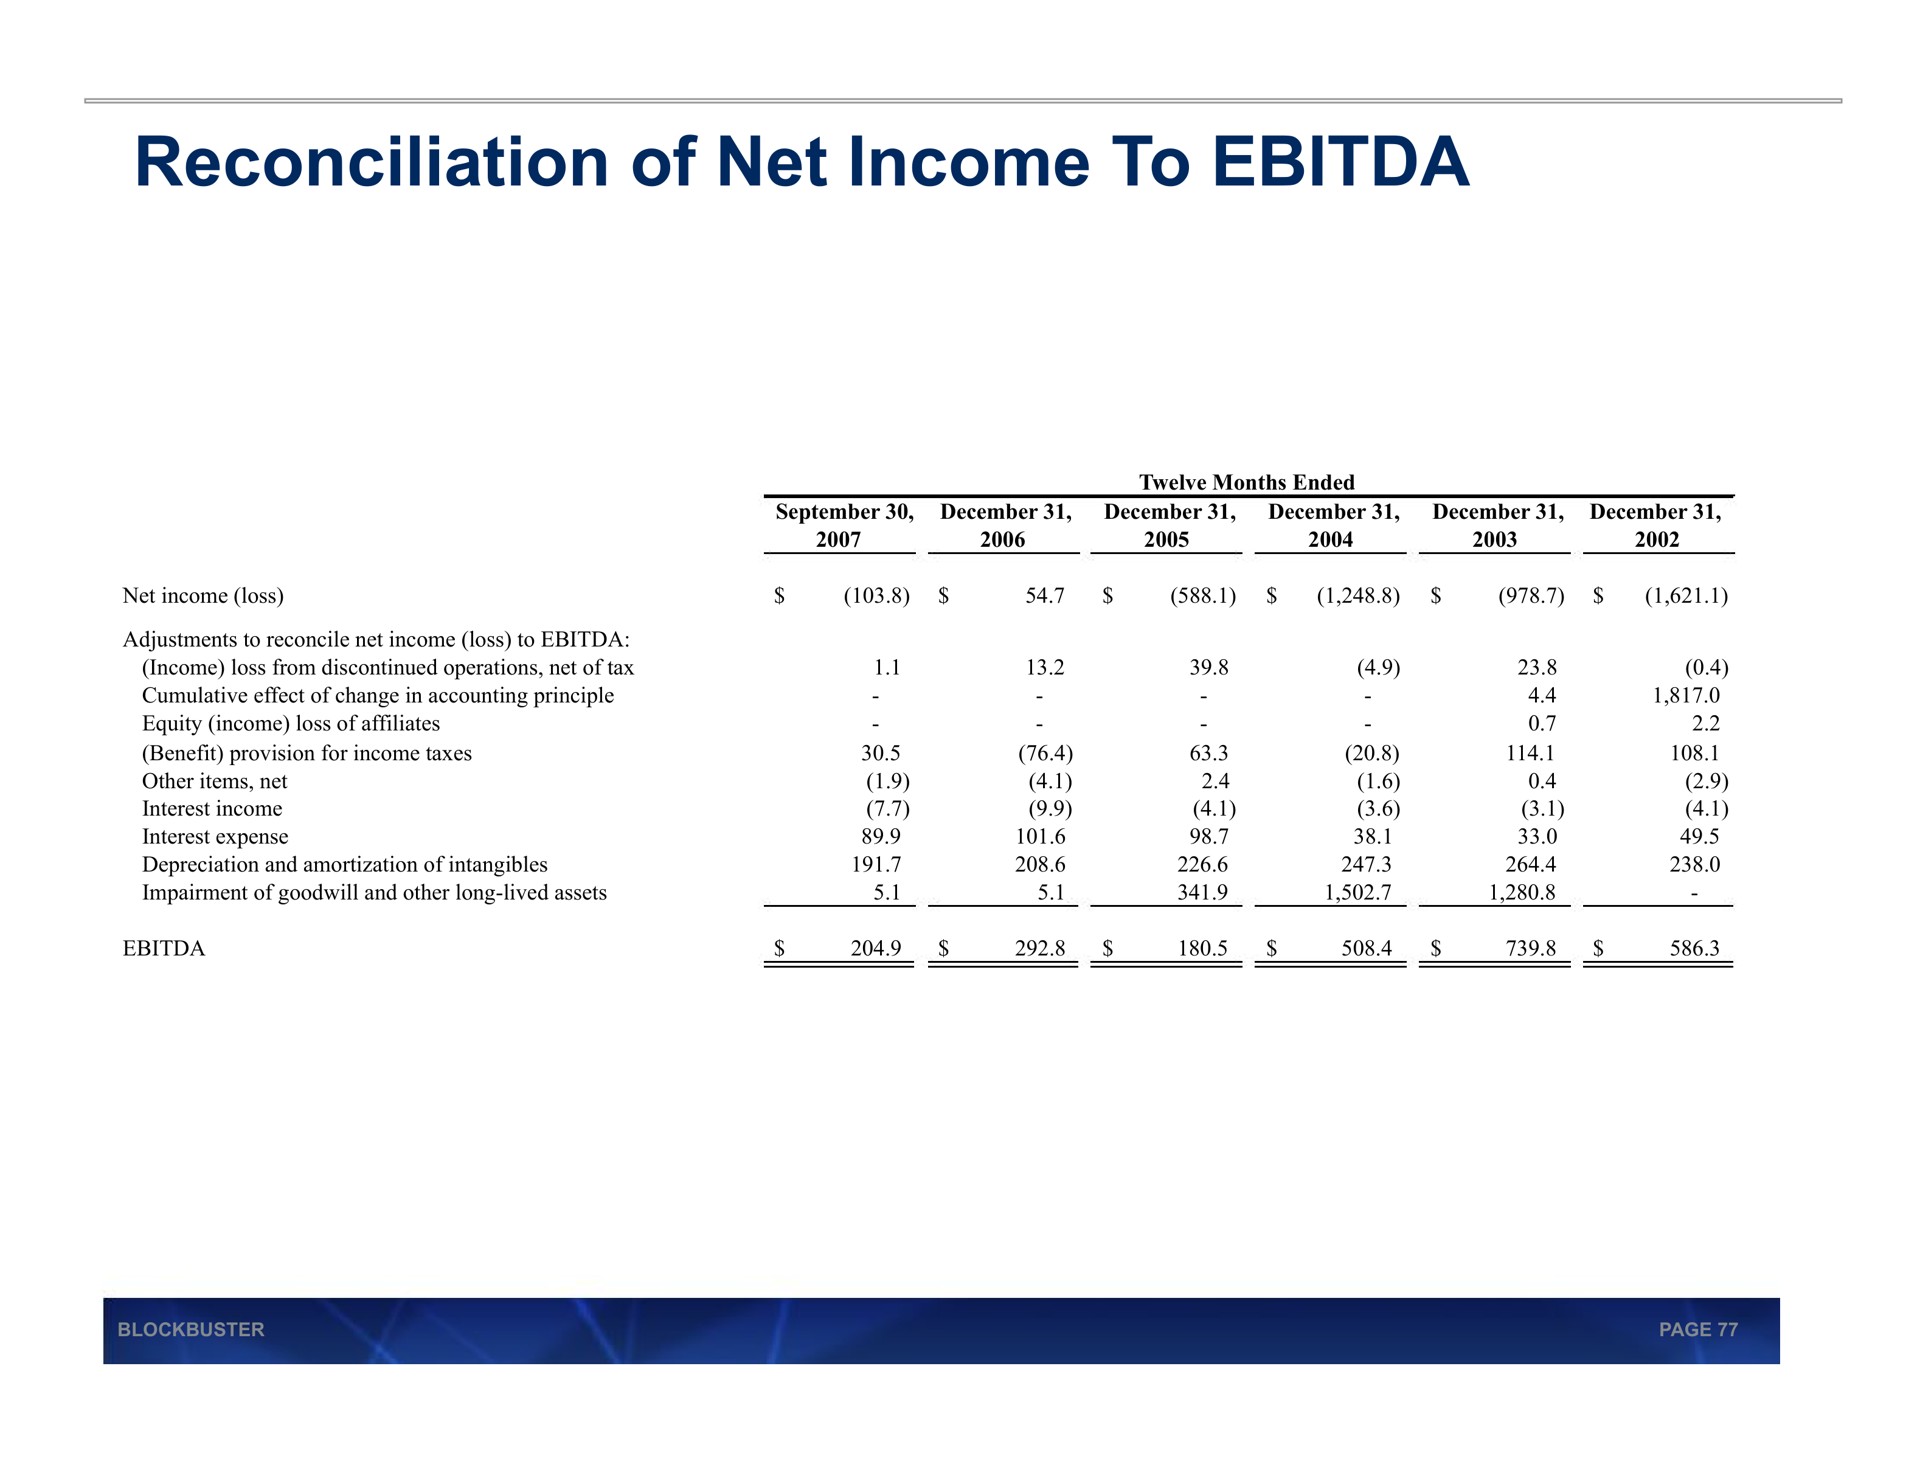 reconciliation of net income to | Blockbuster Video